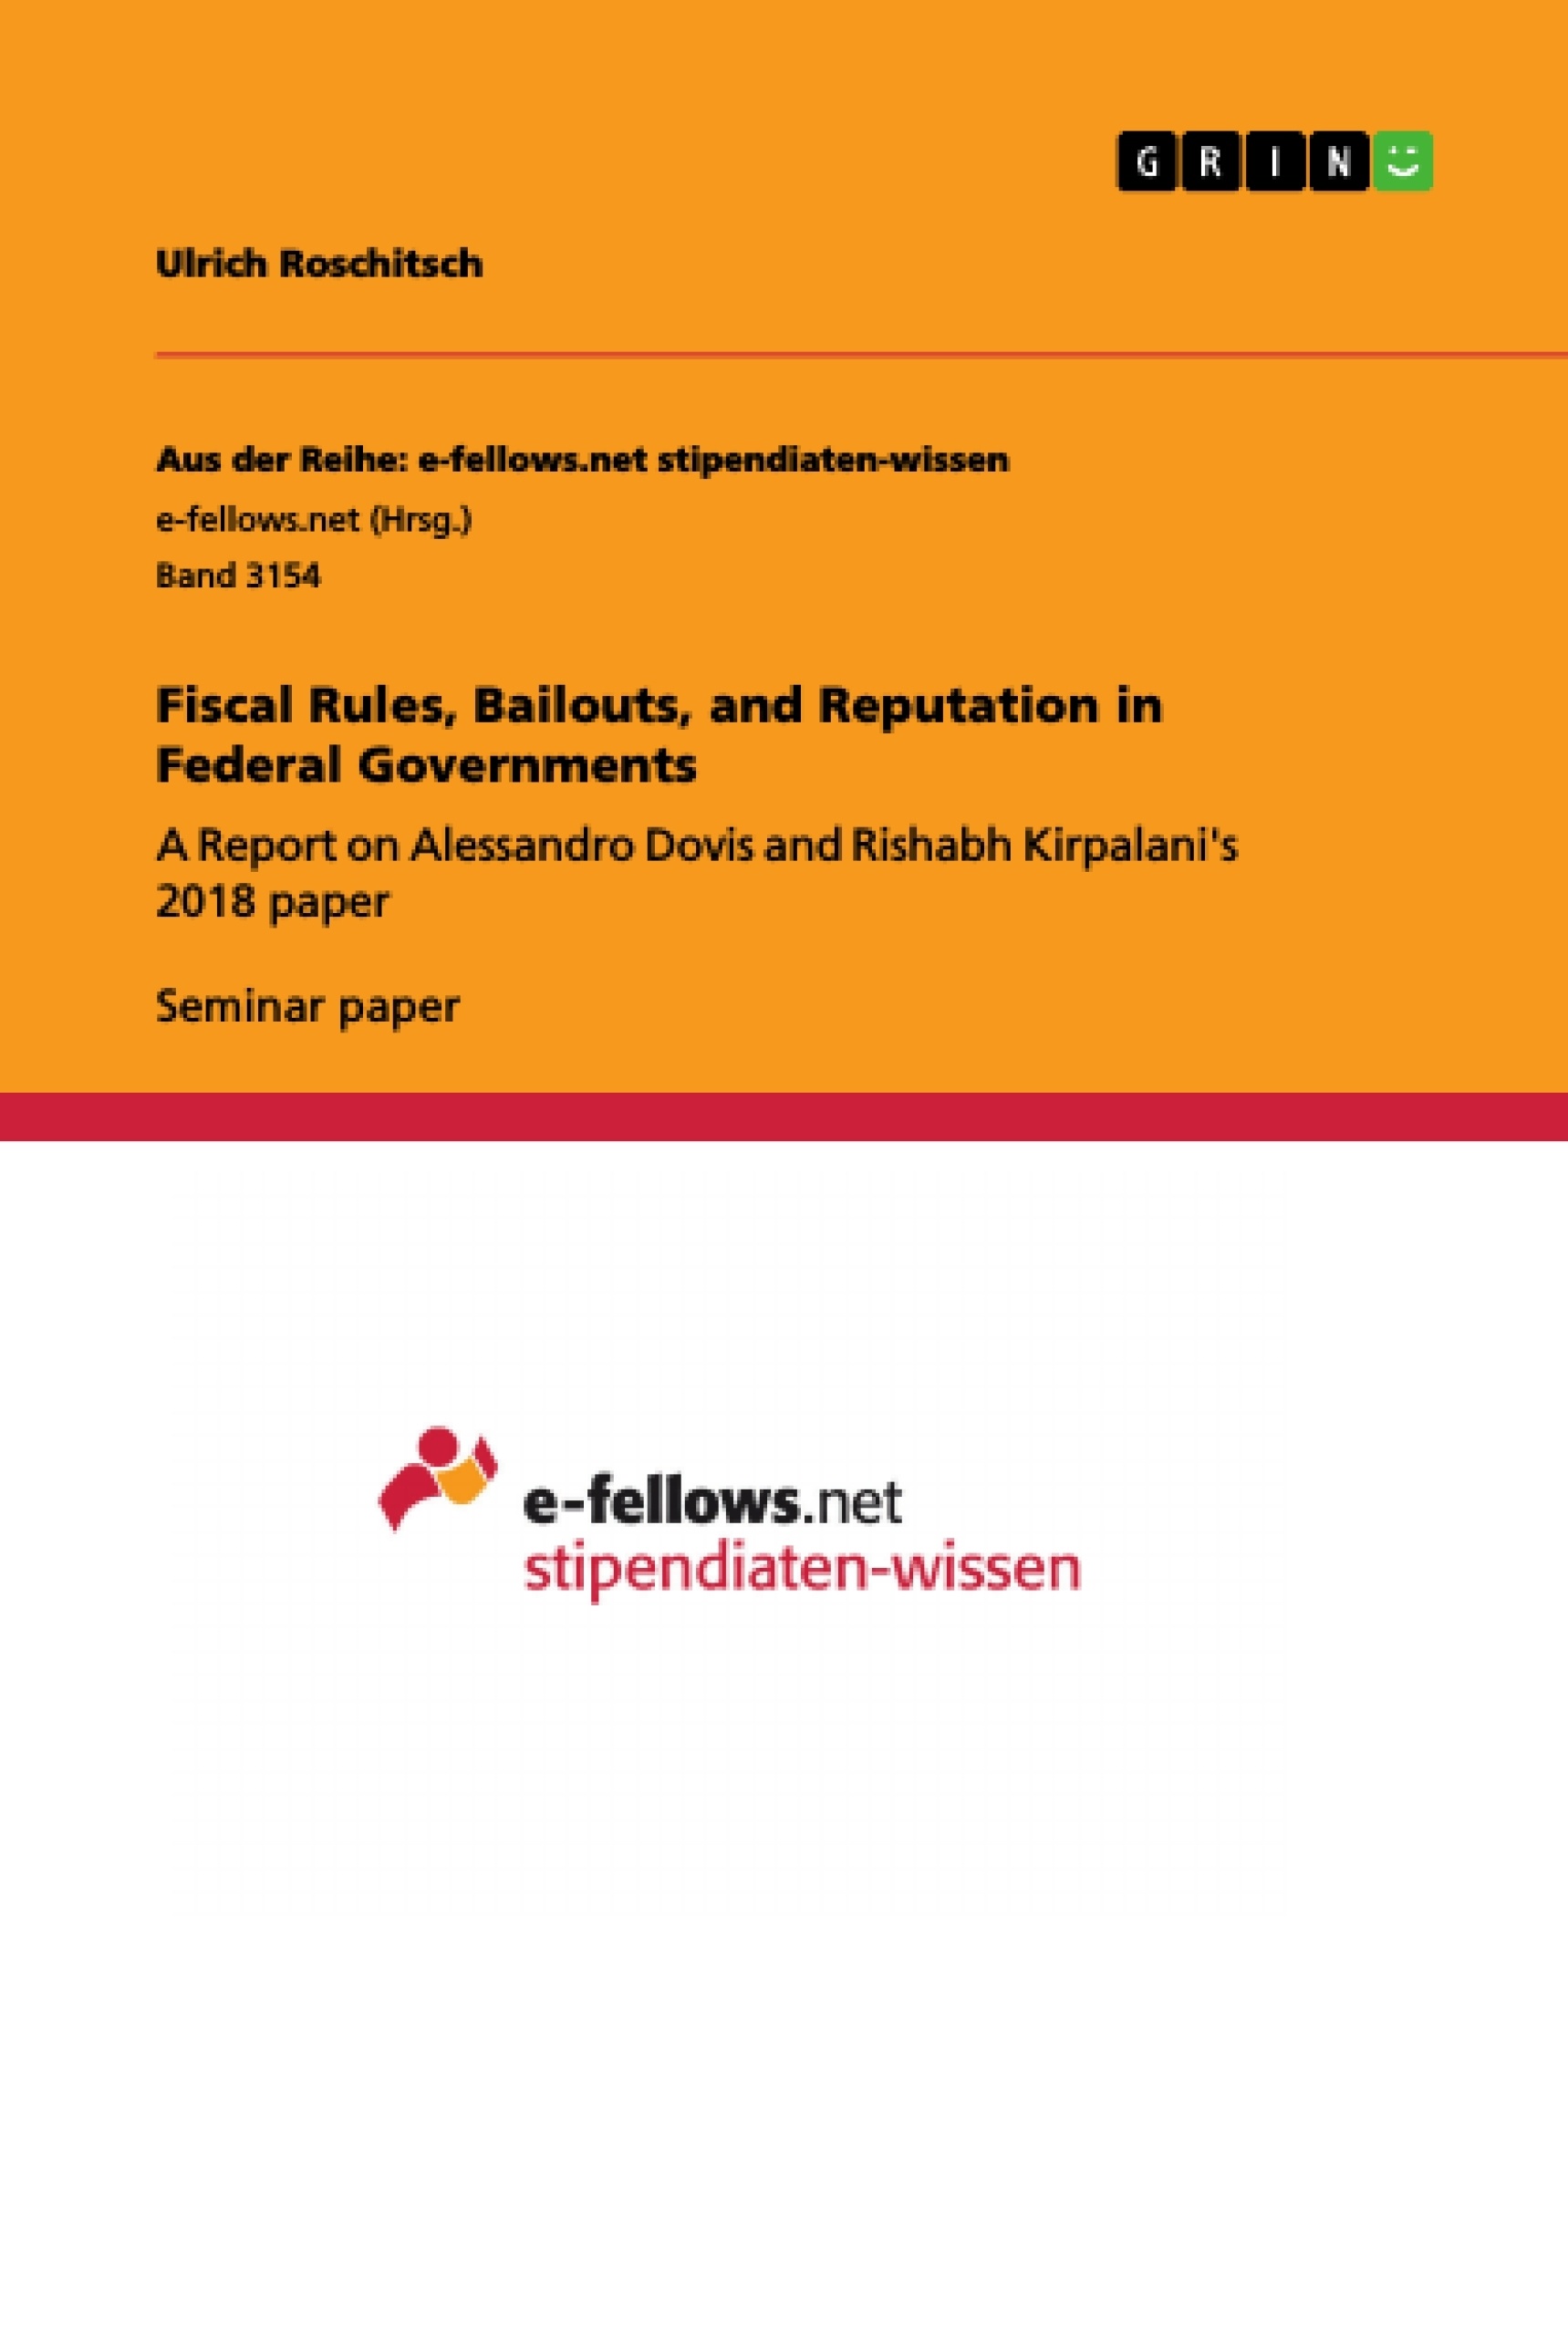 Title: Fiscal Rules, Bailouts, and Reputation in Federal Governments